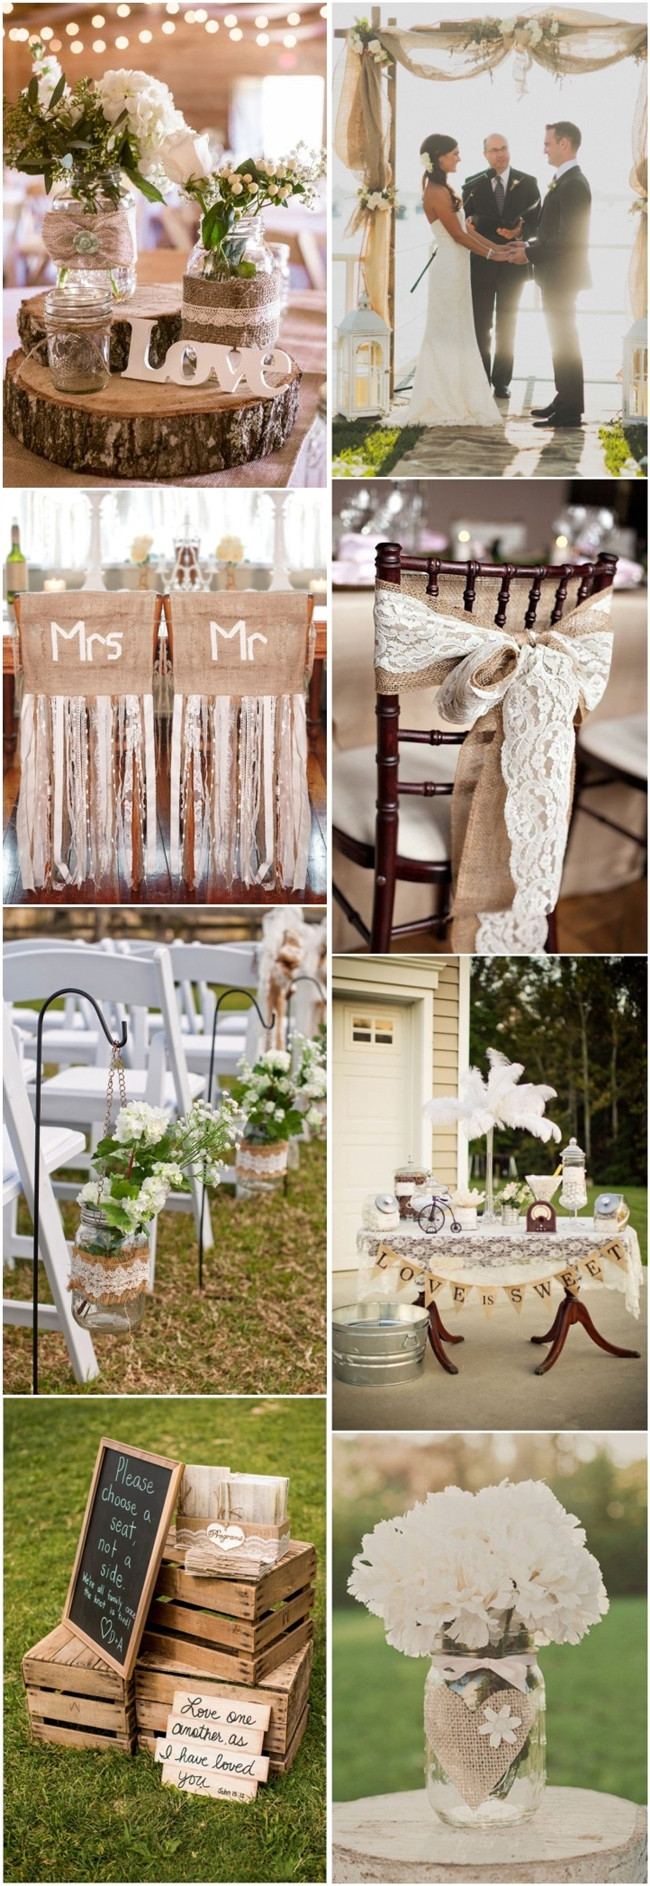 Country Weddings Decorations
 country rustic wedding ideas burlap & lace wedding theme